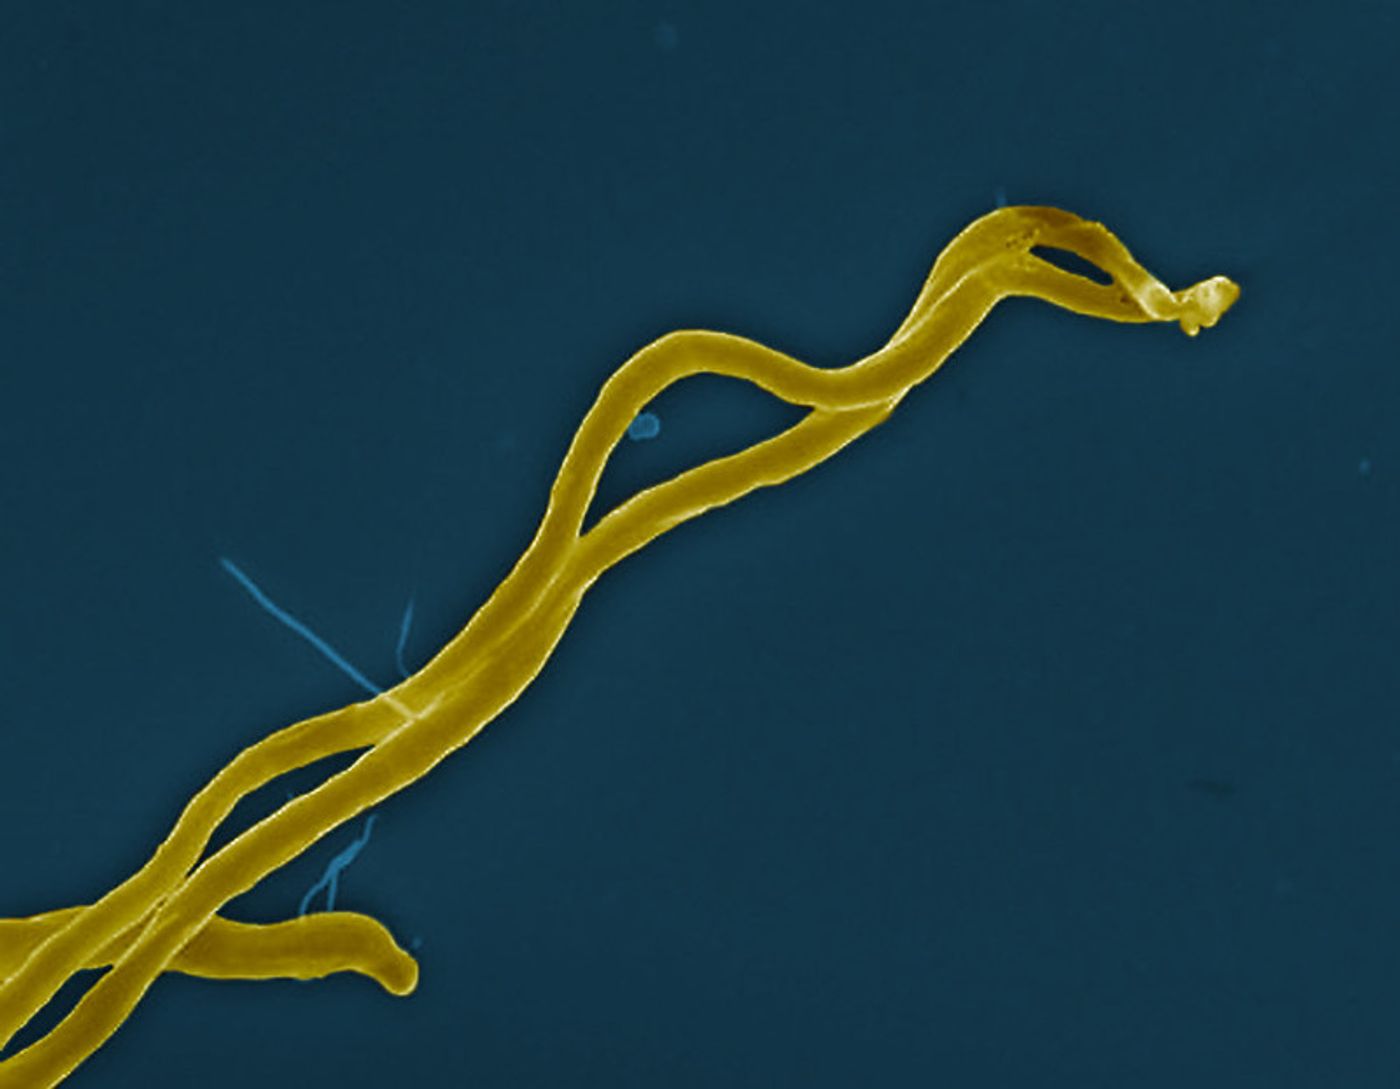 Borrelia burgdorferi bacteria (colorized gold), which can cause Lyme disease through the bite of an infected tick. Credit: NIAID 